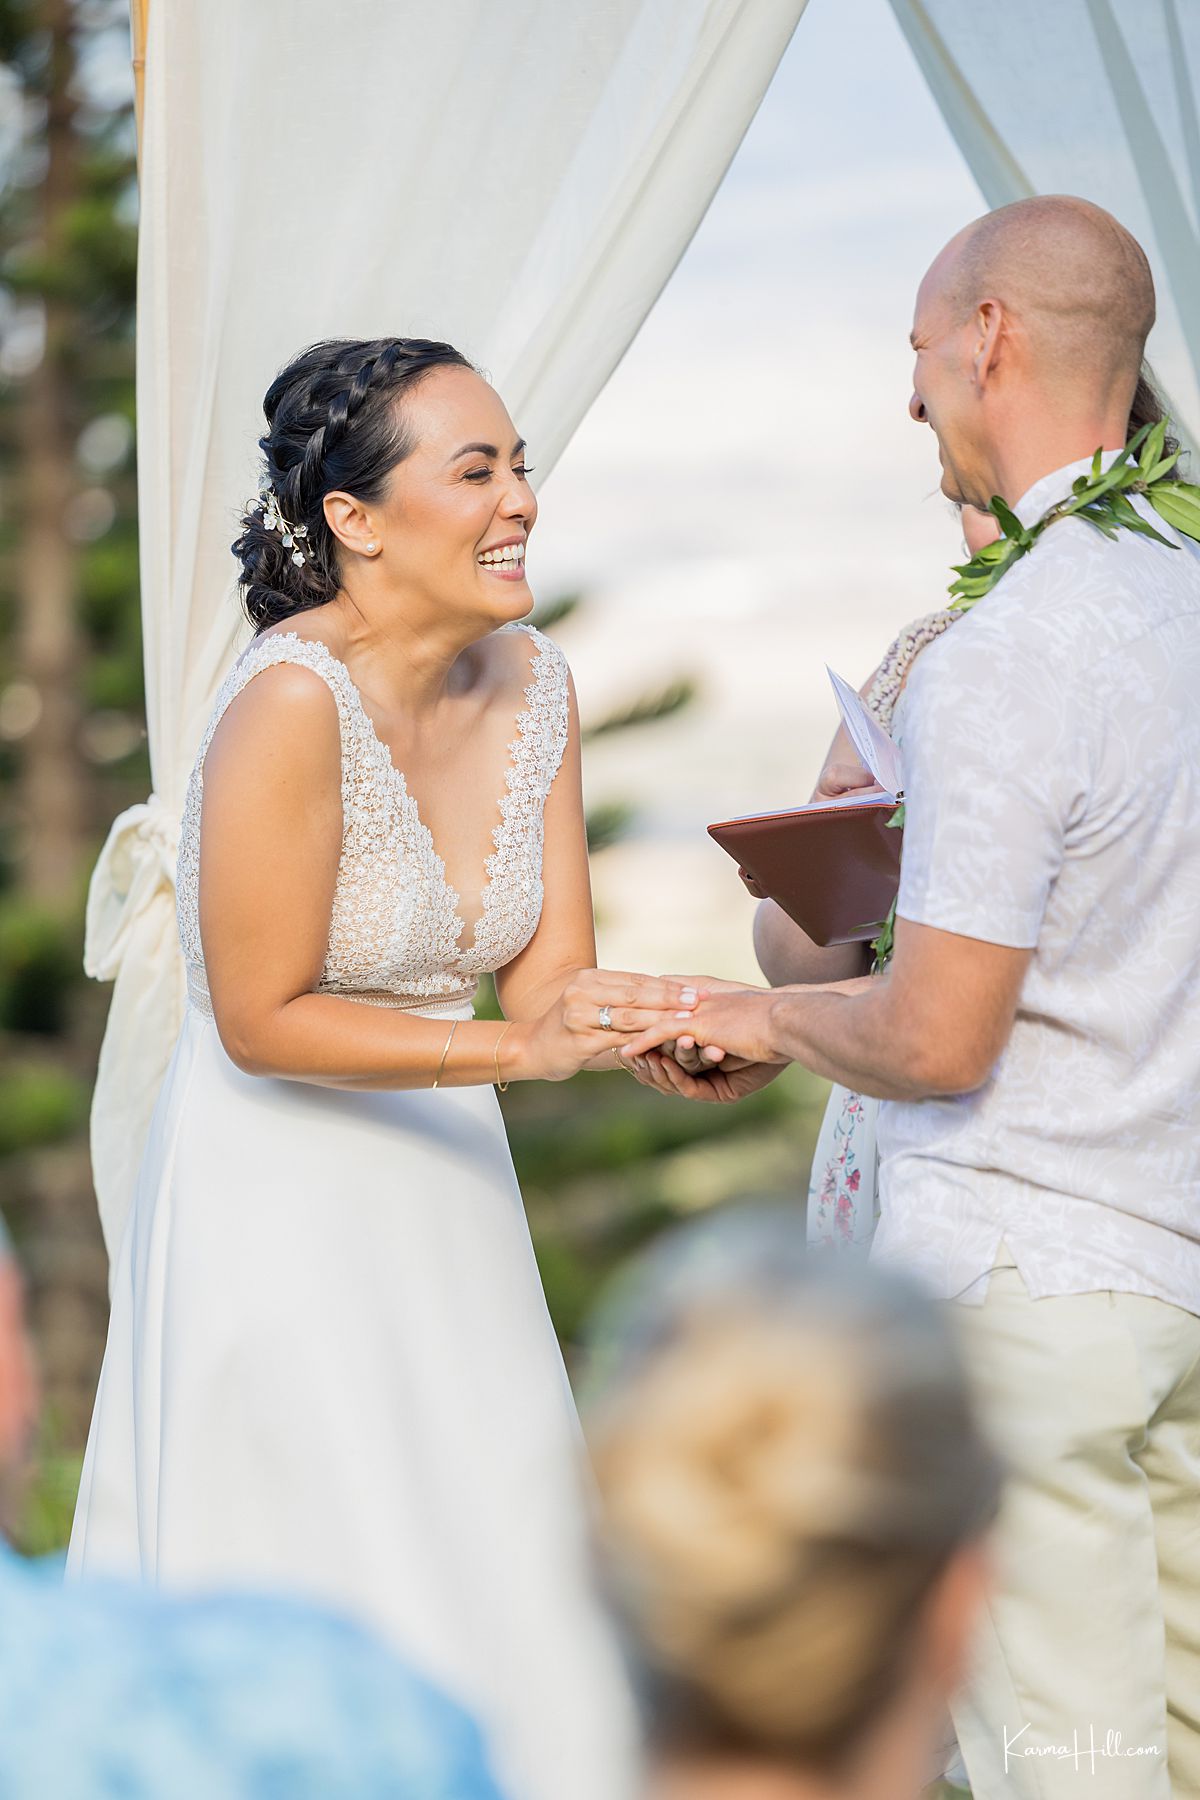 wedding photographer in Maui during ring exchange
